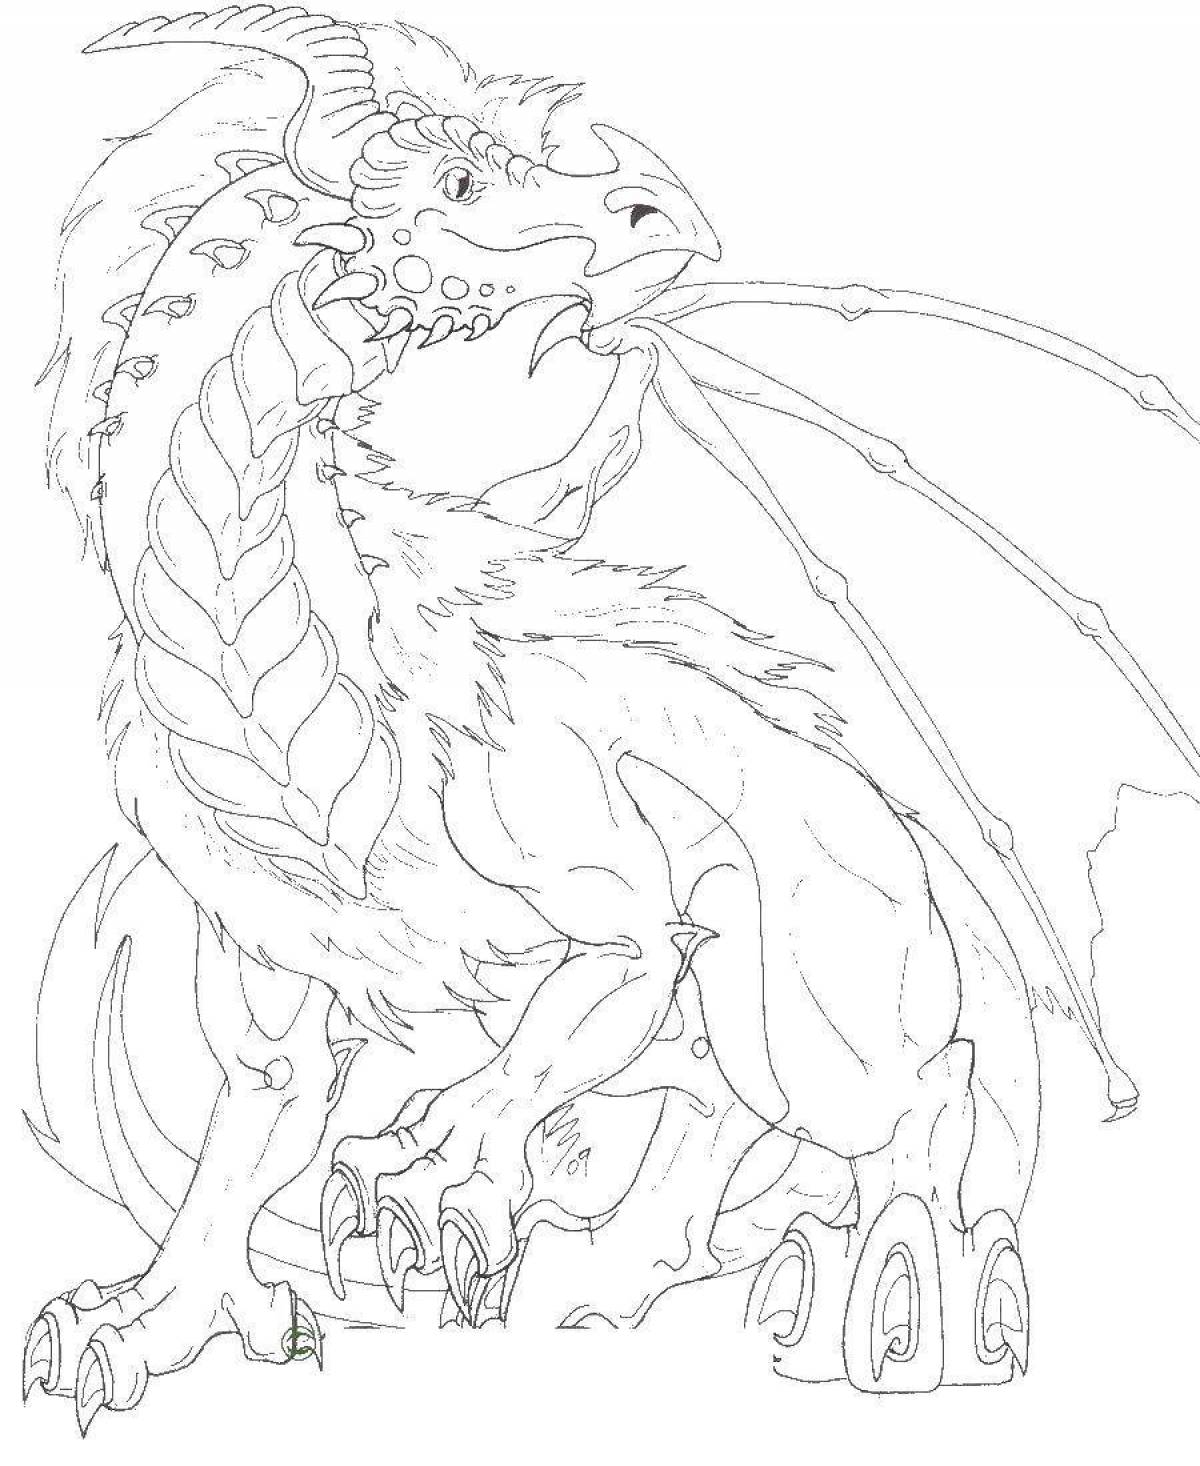 Fabulous dragon coloring pages